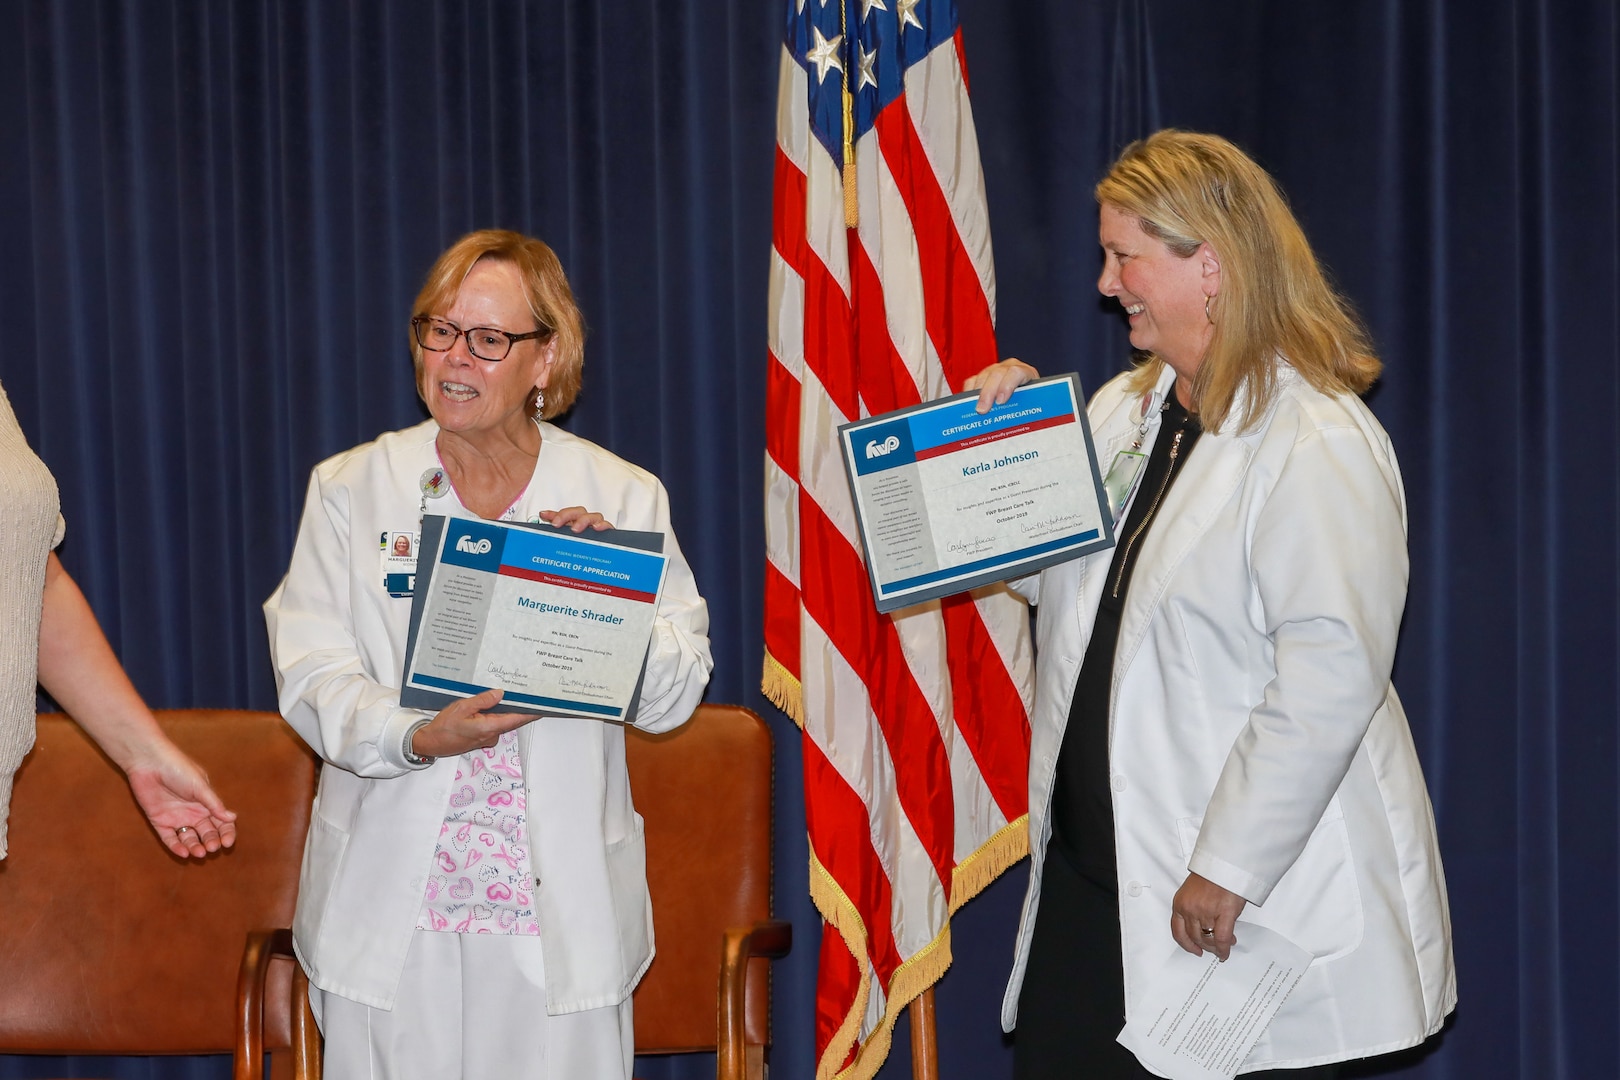 Certified Breast Care Nurse and Breast Health Navigator Marguerite “Meg” Shrader from Chesapeake Regional Breast Center (left), and Lactation Consultant Karla Johnson from Naval Medical Center Portsmouth (right) were awarded with a certificate of appreciation for their education efforts for the NNSY workforce by the Federal Women’s Program.